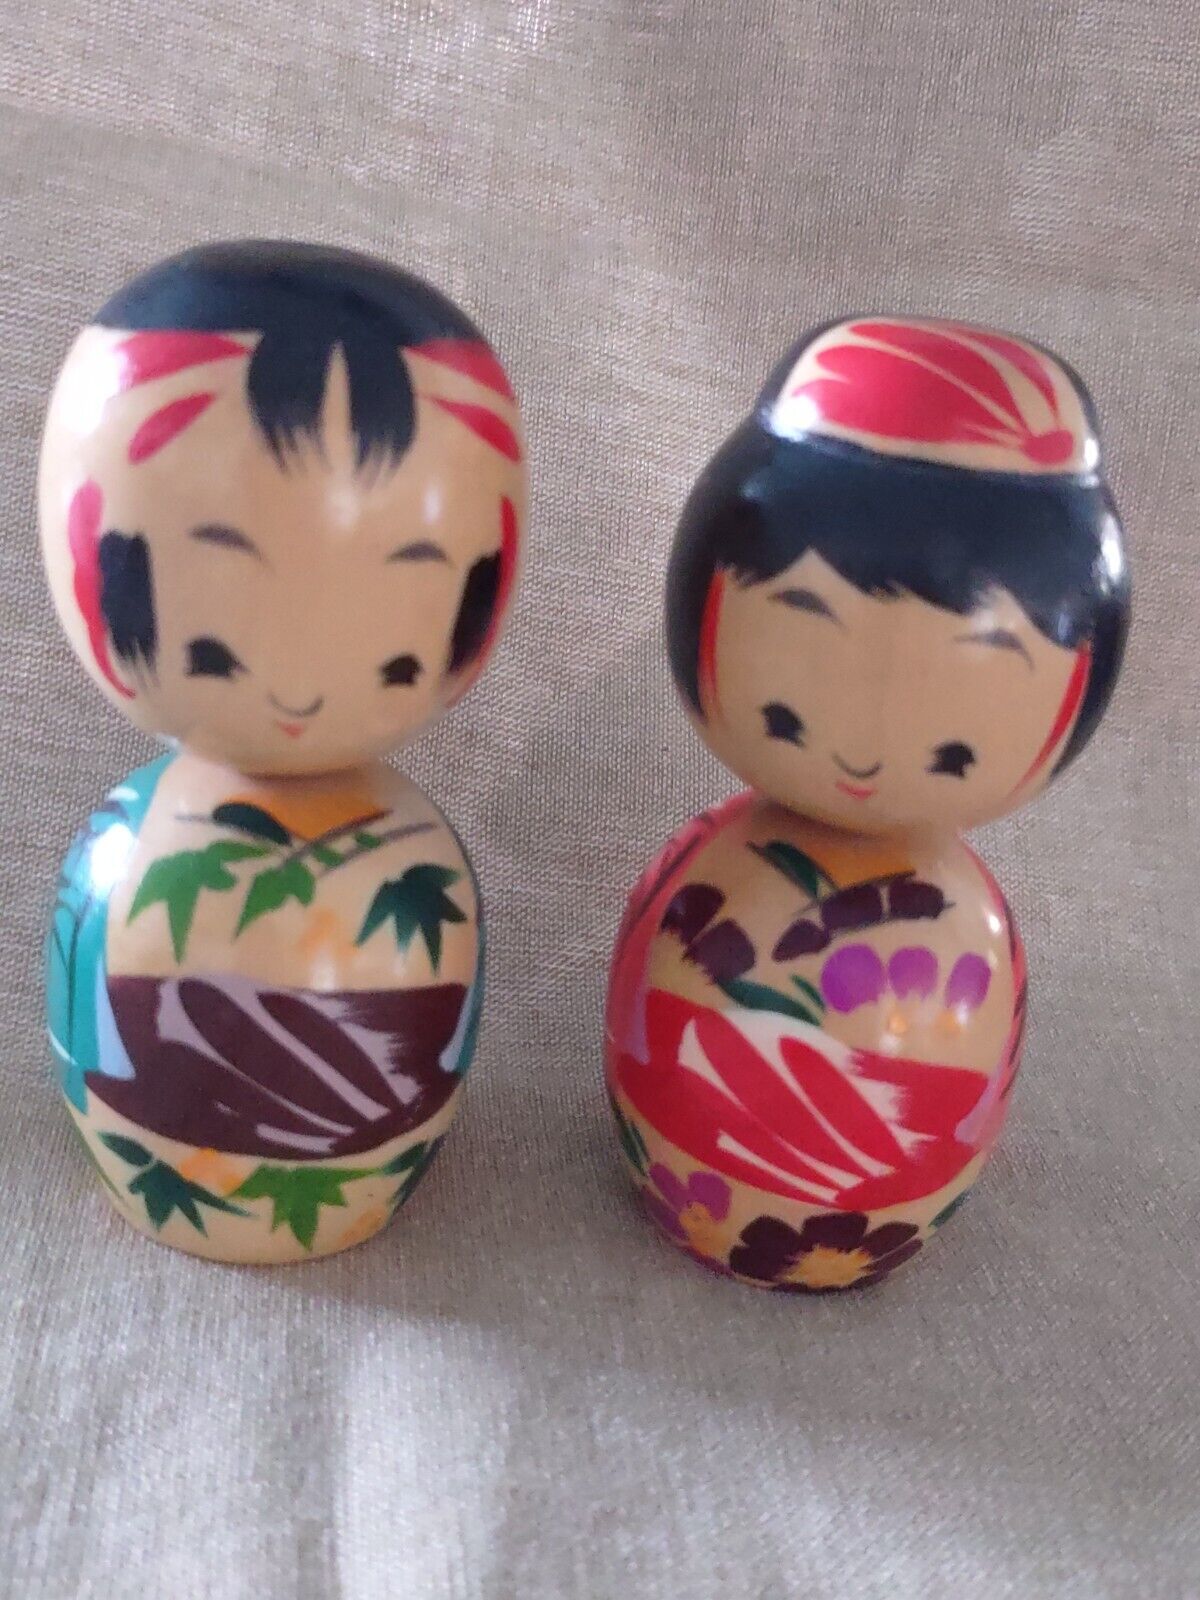 Japanese Kokeshi Solid Wood Doll Pair Girl Boy Green Red 3.5” Tall Handcrafted